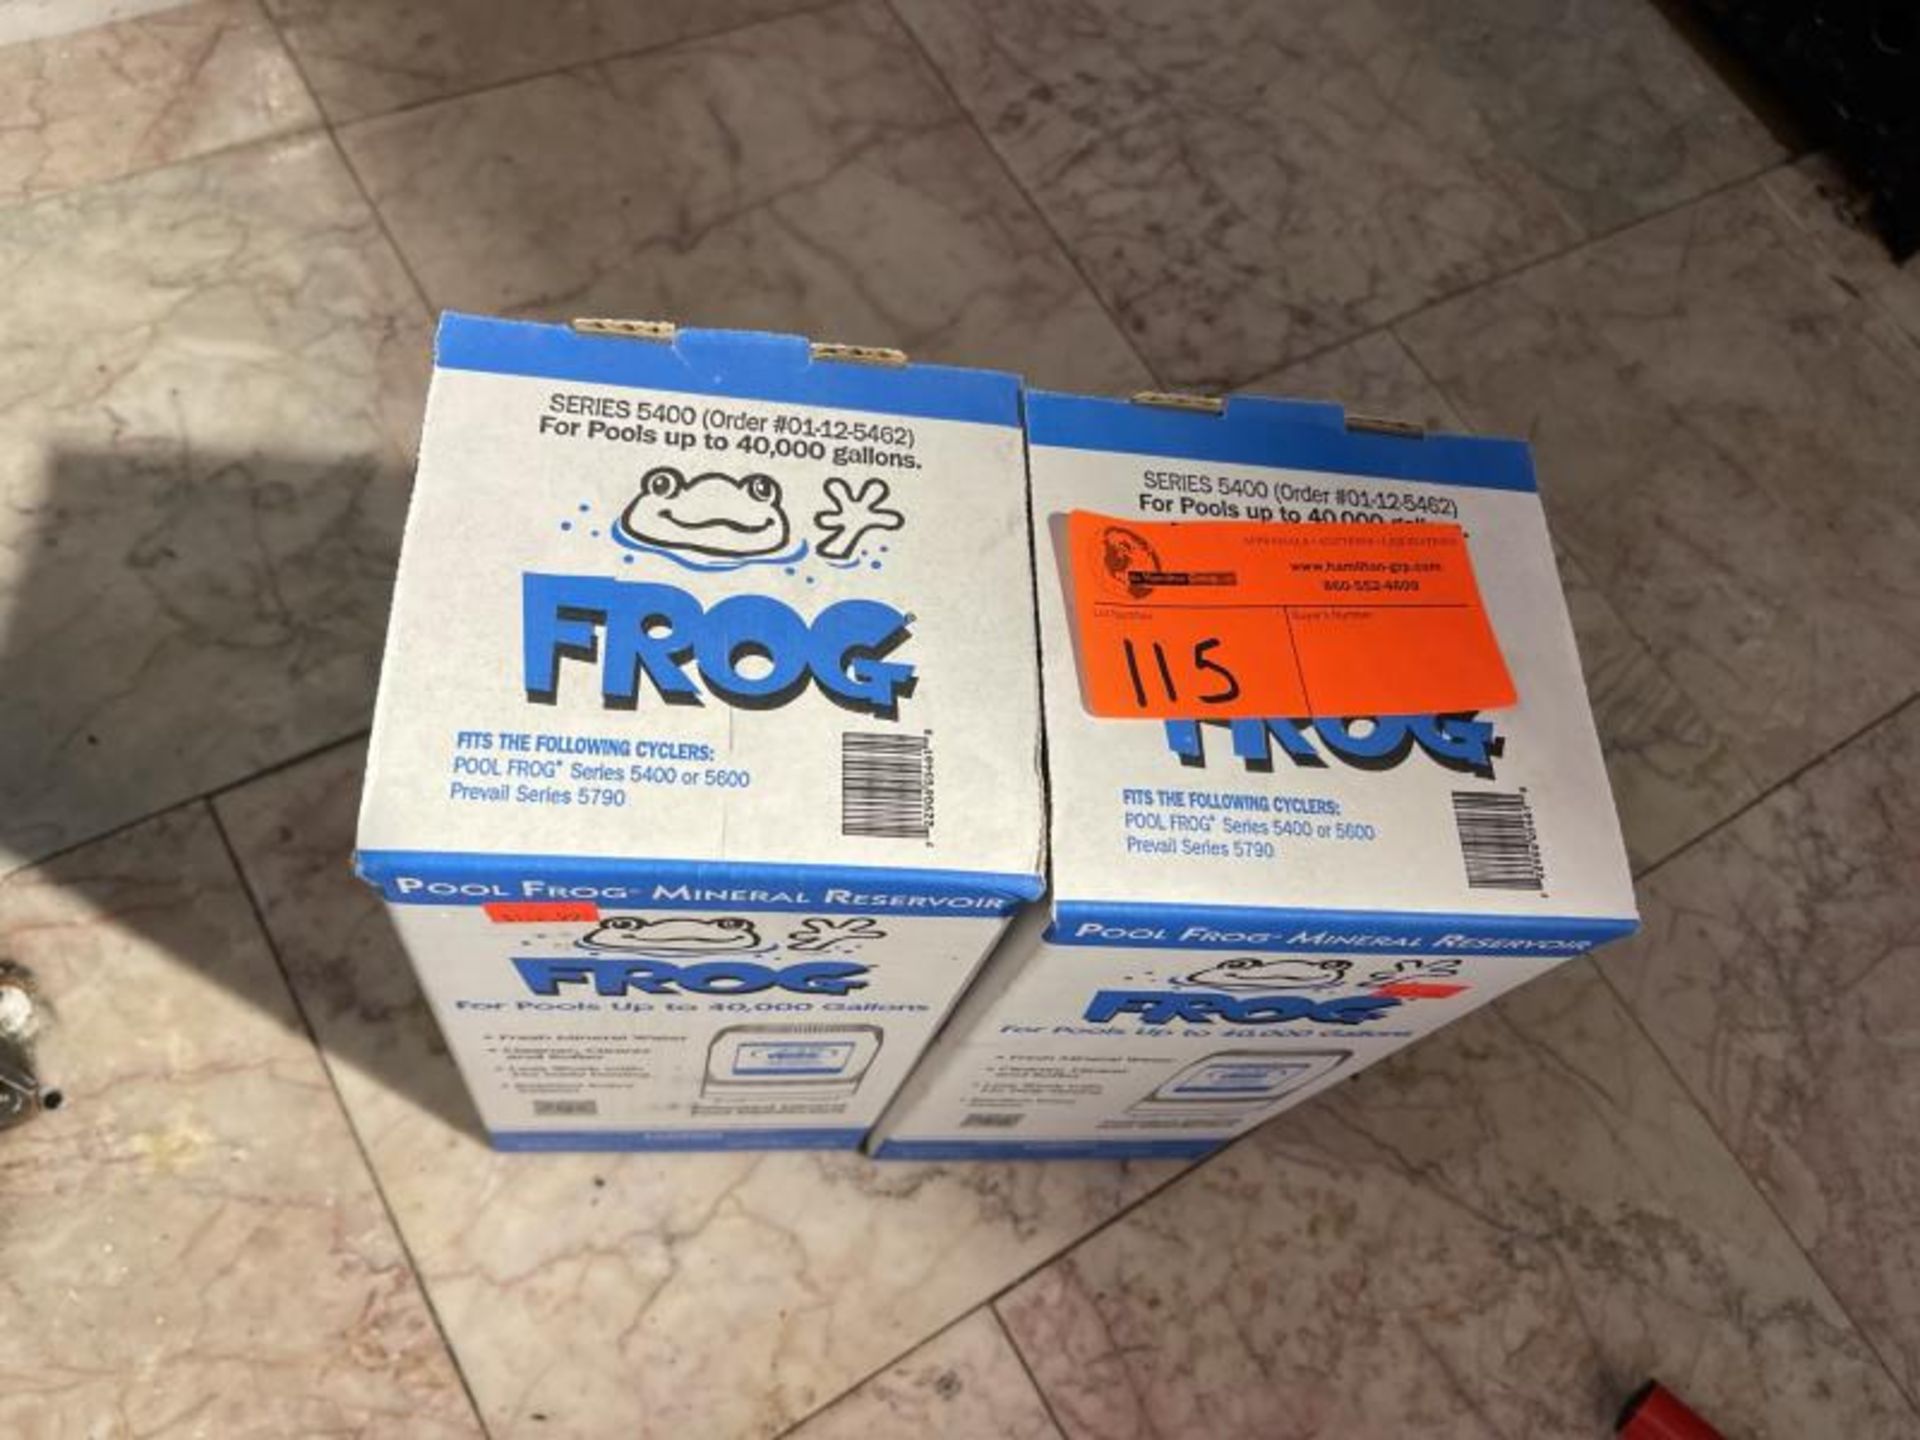 Lot of (2) Pool Frog mineral reservoir refills for pools up to 40,000 gallons, series 540 - Image 2 of 2